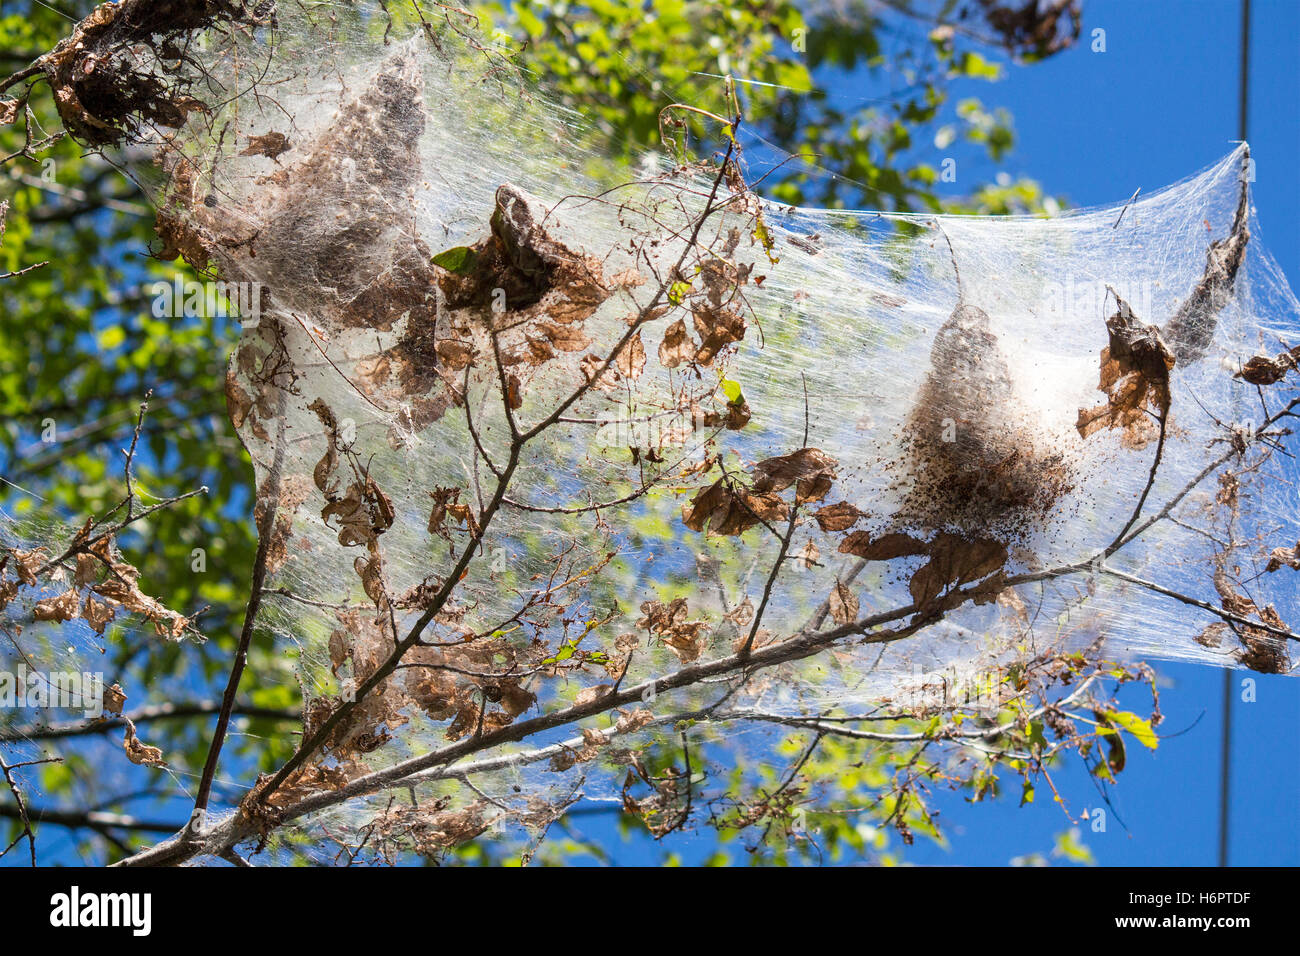 Infestation of Tent Caterpillars in tree Stock Photo